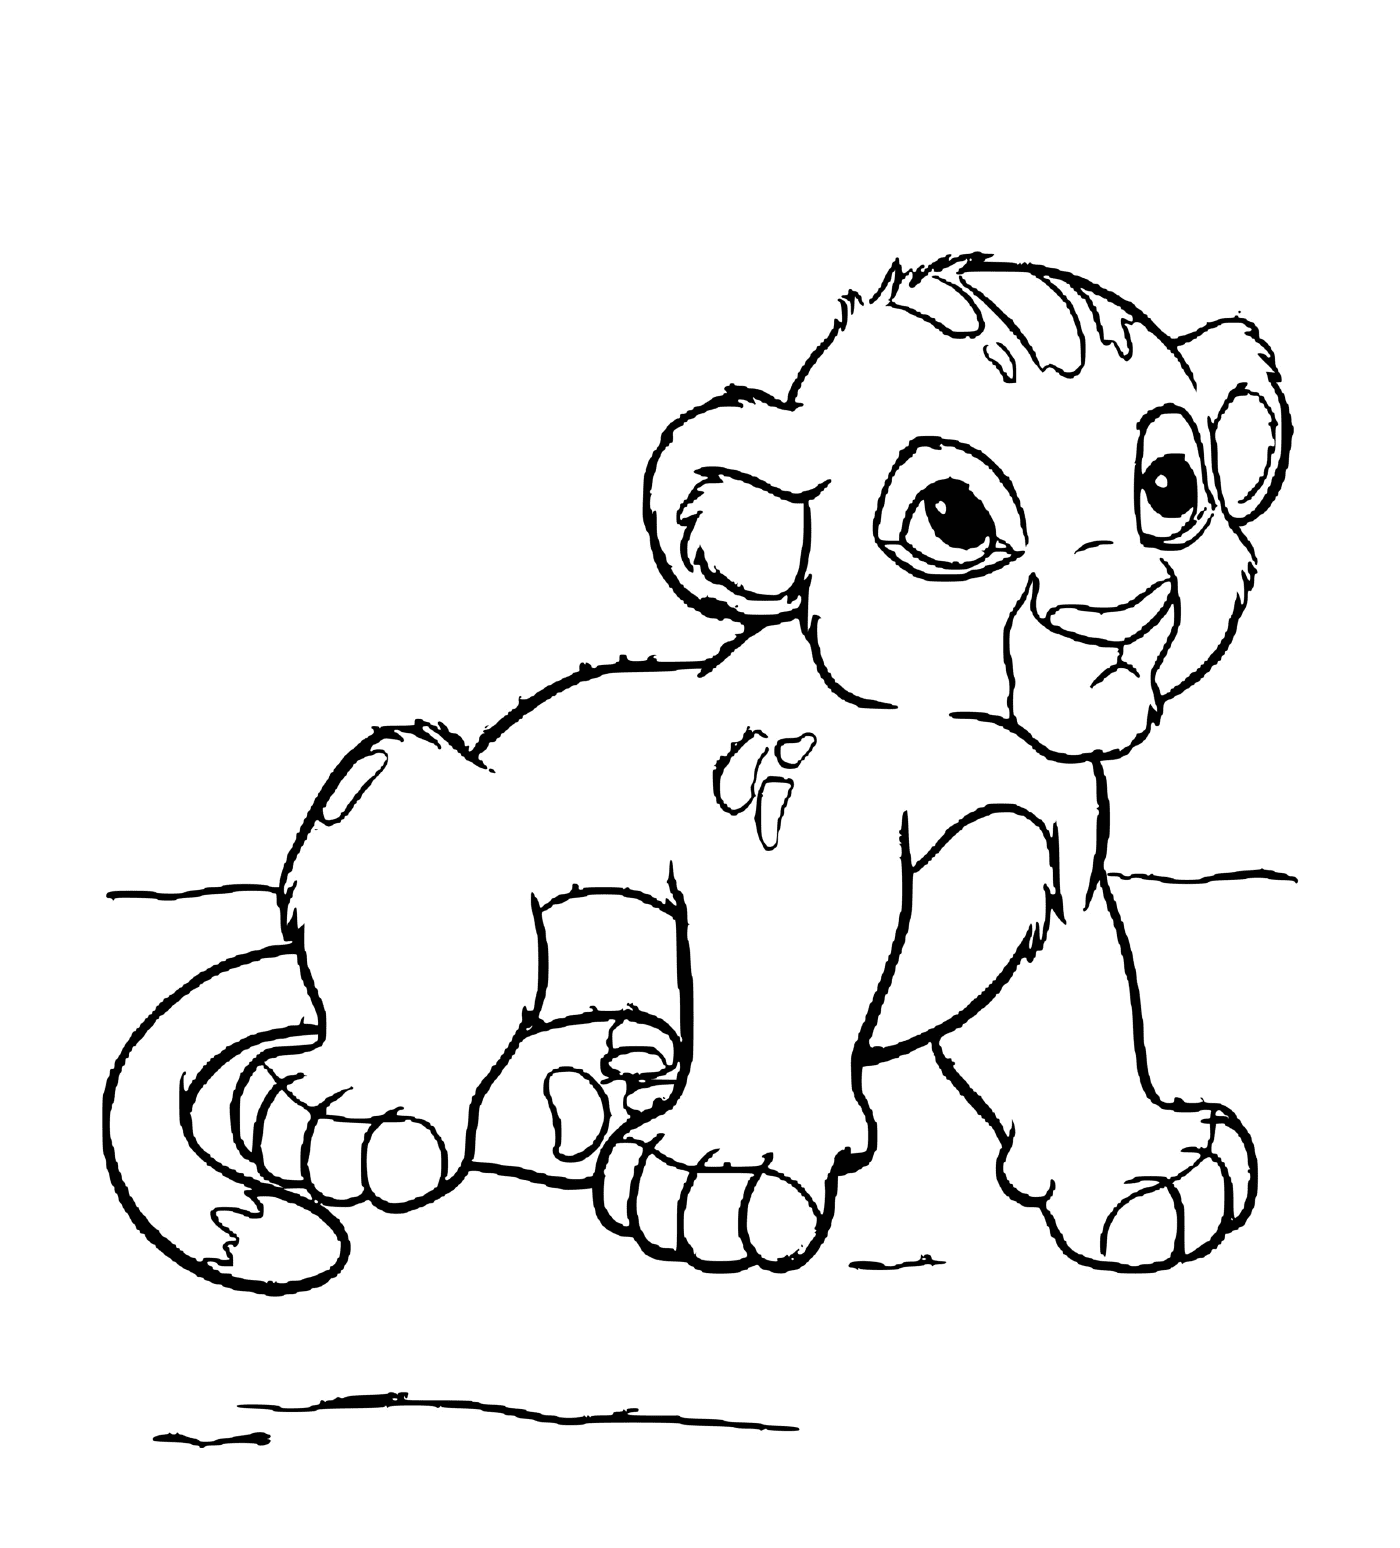  A young Simba baby 